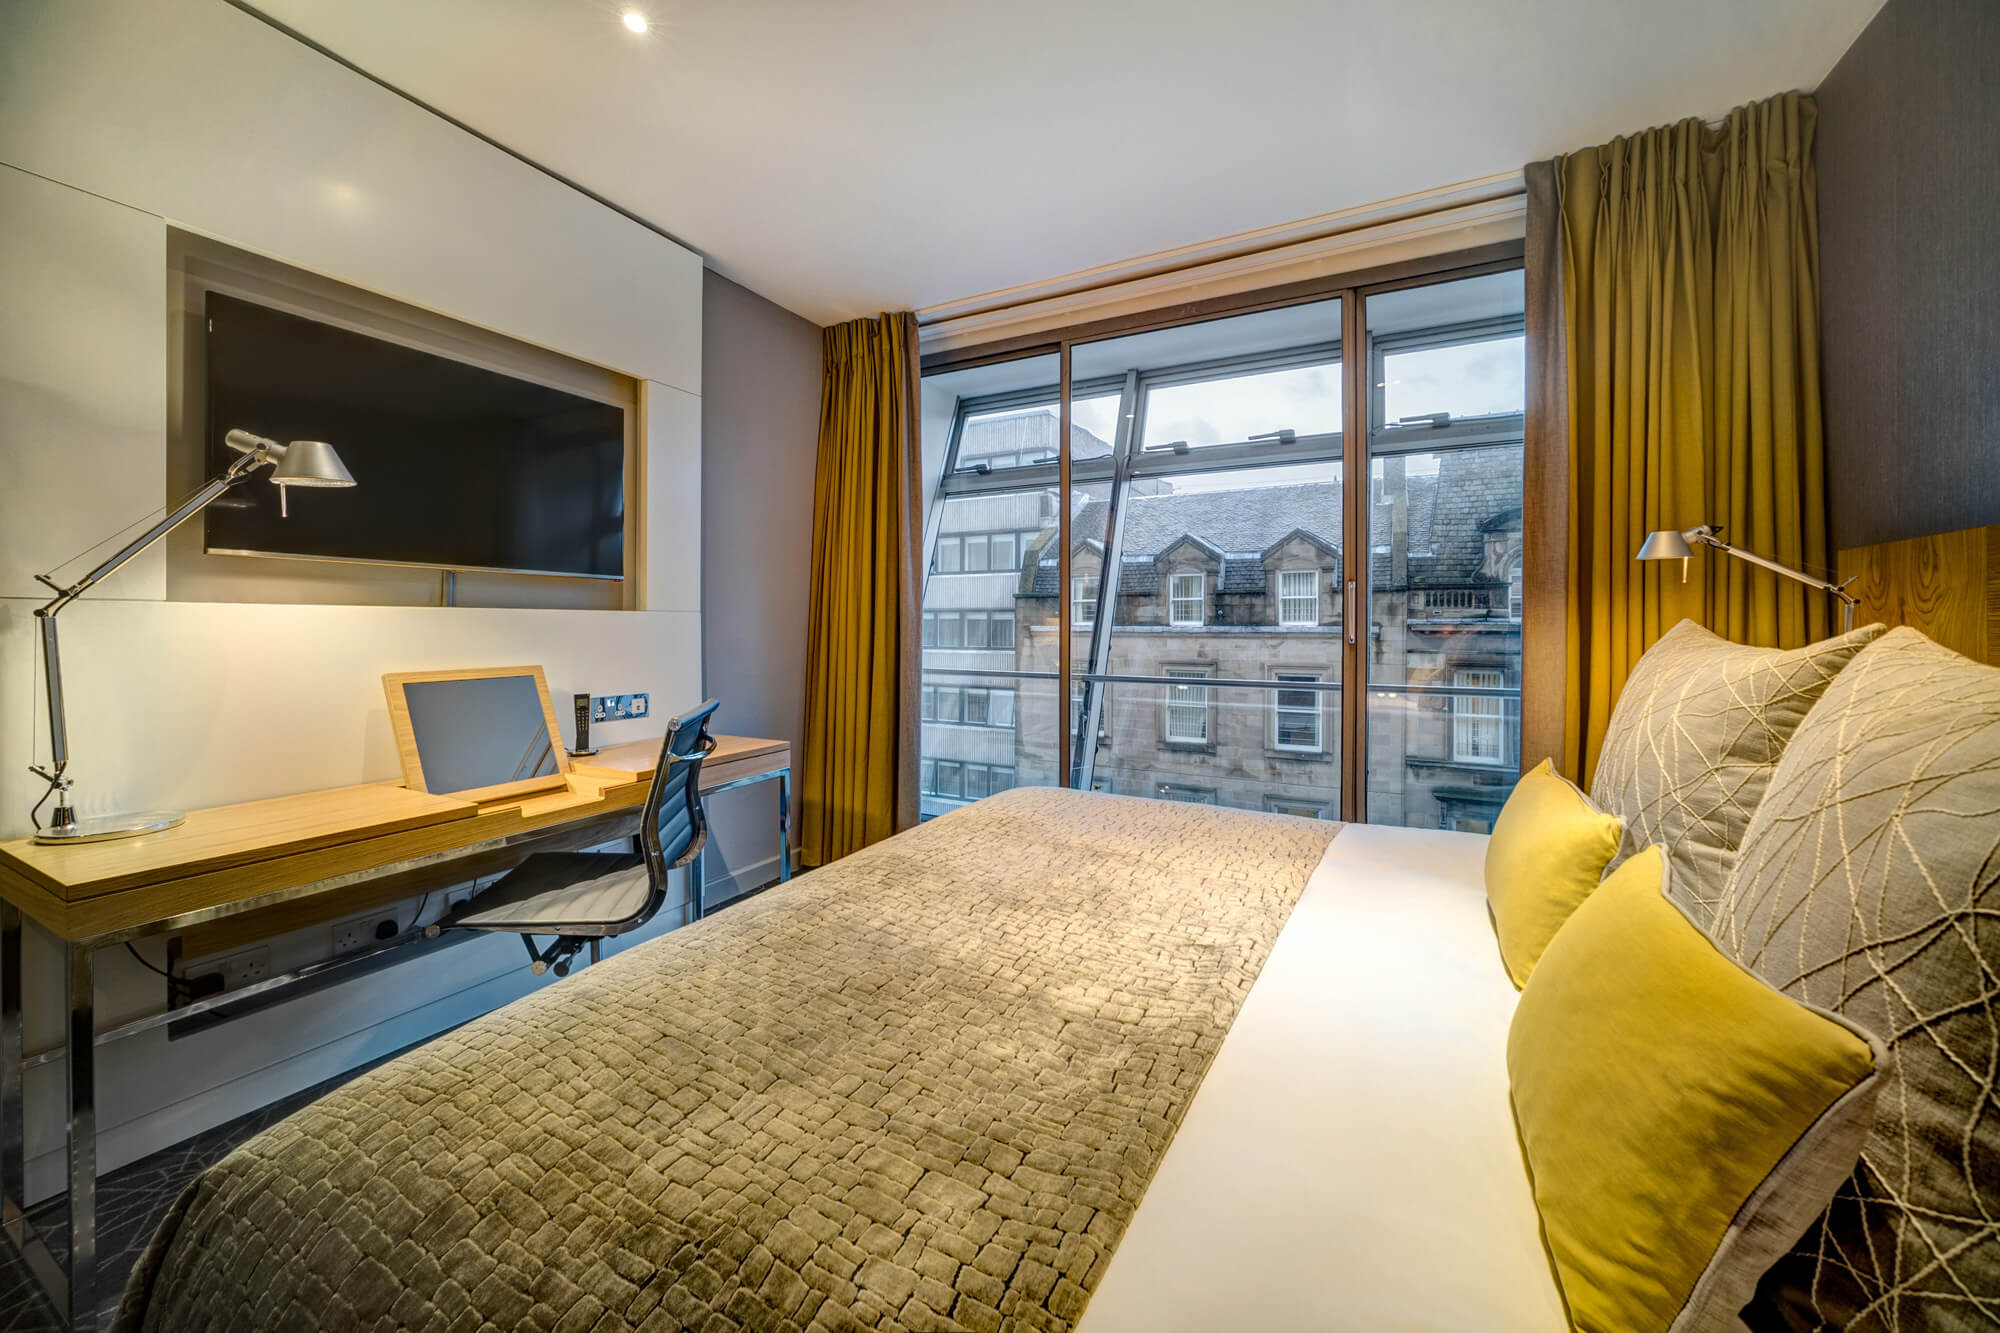 Standard Room at Apex City of Glasgow Hotel with large window and view